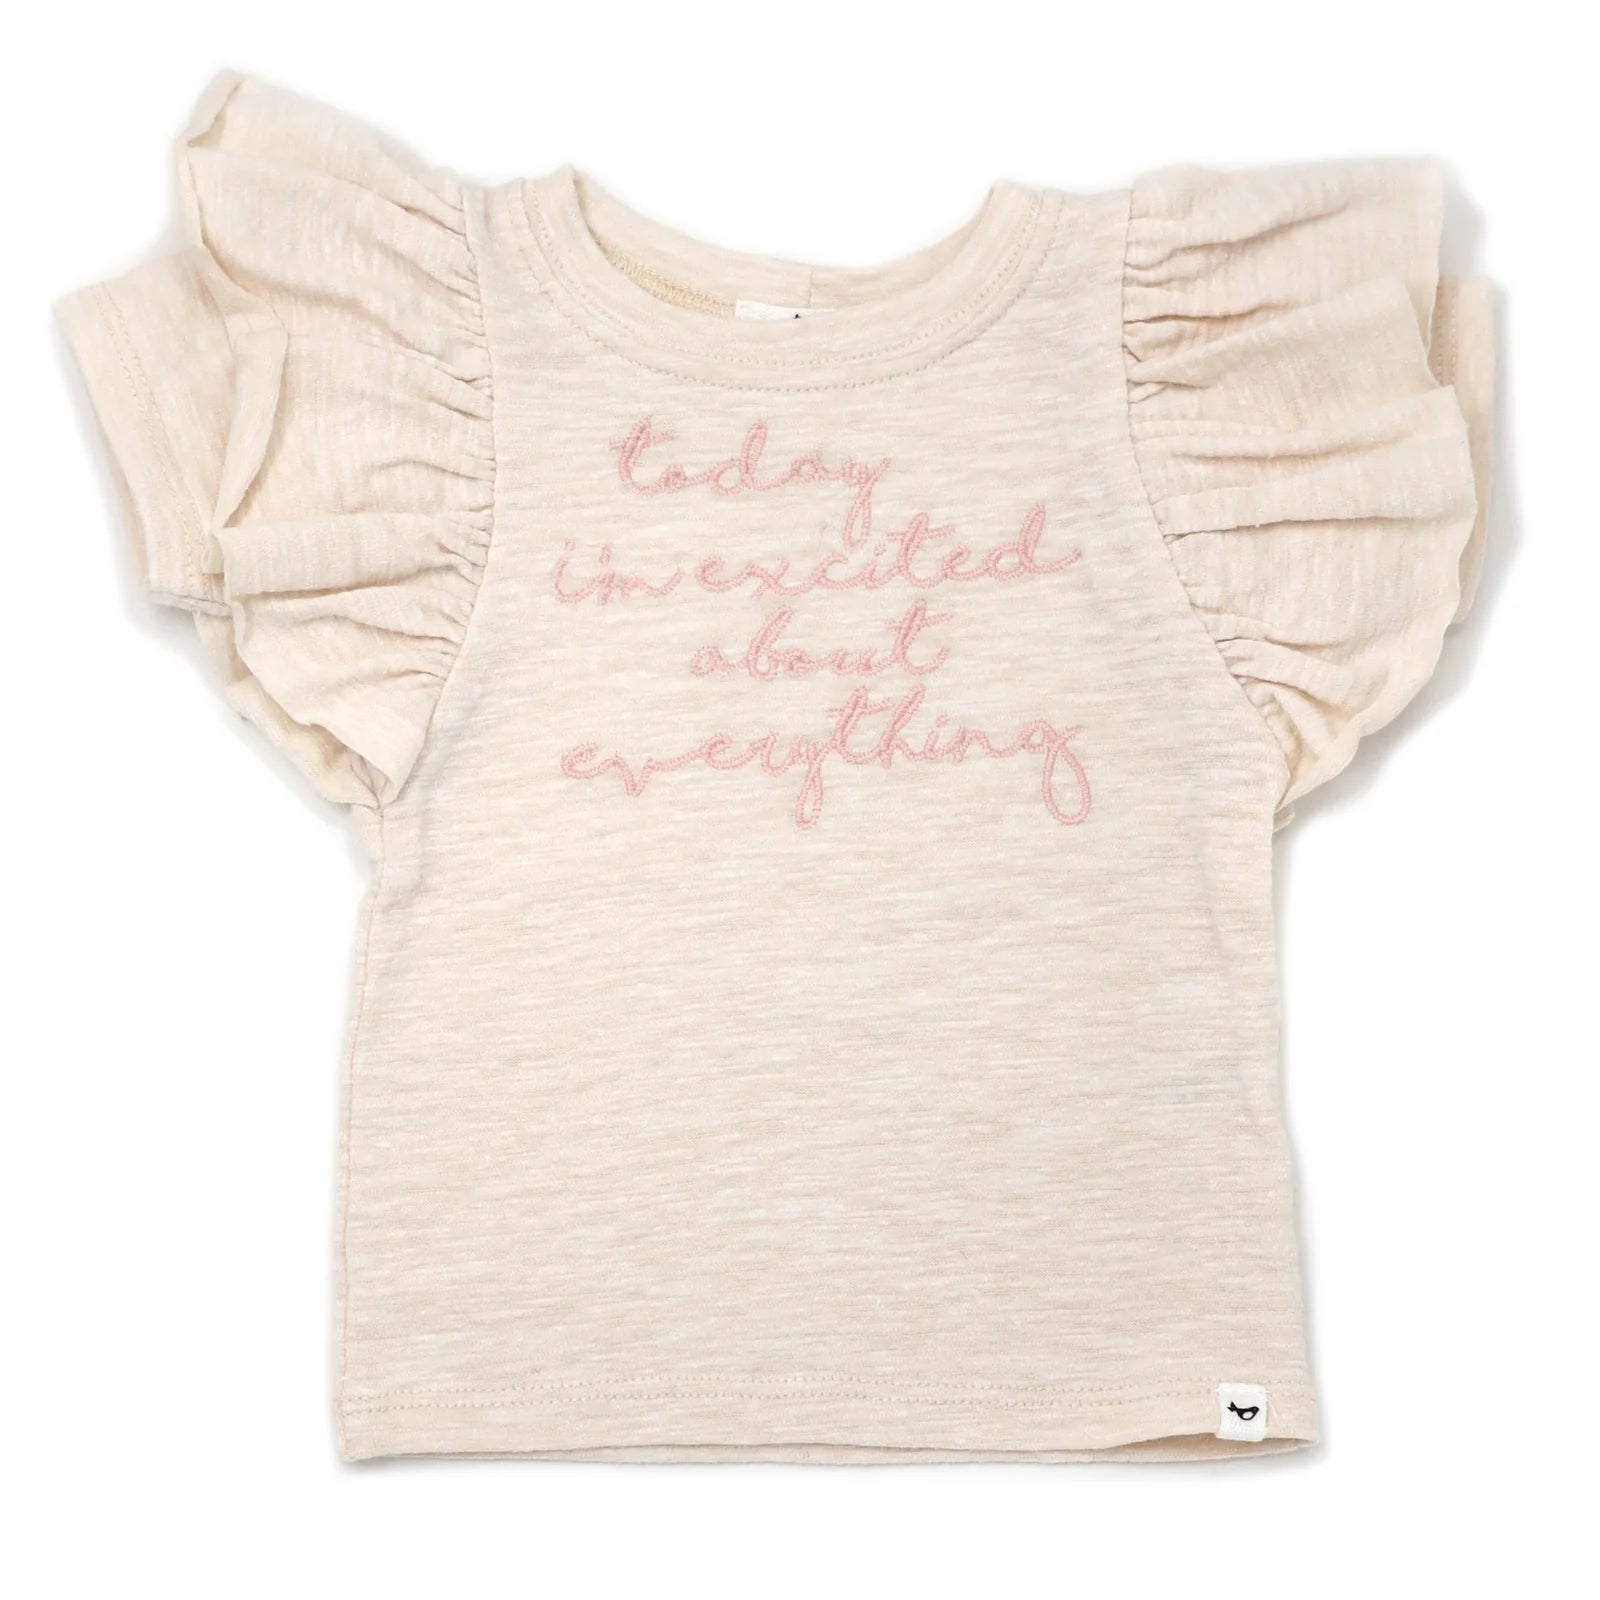 "Today I'm Excited..." Embroidery Butterfly Tee